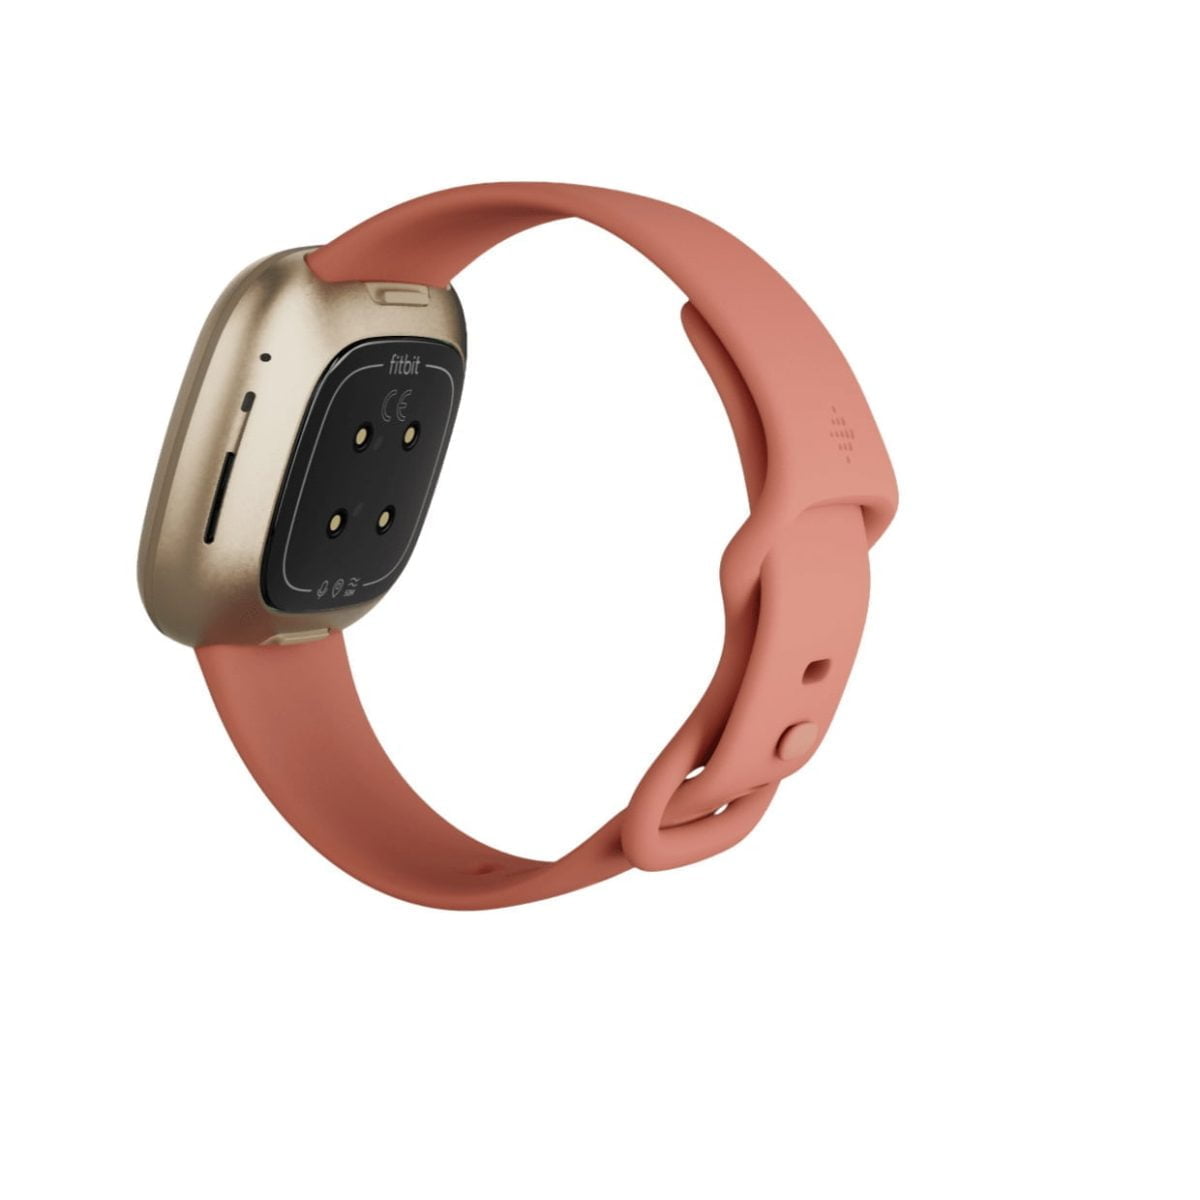 10 Fitbit &Lt;H1&Gt;Fitbit Versa 3, Health &Amp; Fitness Smartwatch With Gps, Pink Clay / Soft Gold Aluminum&Lt;/H1&Gt; Https://Youtu.be/Ihx_Bl3Yqlc &Lt;Div Class=&Quot;Product-Specs-Desc__Text&Quot;&Gt; Meet Fitbit Versa 3, The Motivational Health &Amp; Fitness Smartwatch With Built-In Gps, Active Zone Minutes And Music Experiences To Keep You Moving. &Lt;/Div&Gt; Fitbit Versa 3 Fitbit Versa 3 Fitness Smartwatch With Gps - Pink Clay / Soft Gold Aluminum